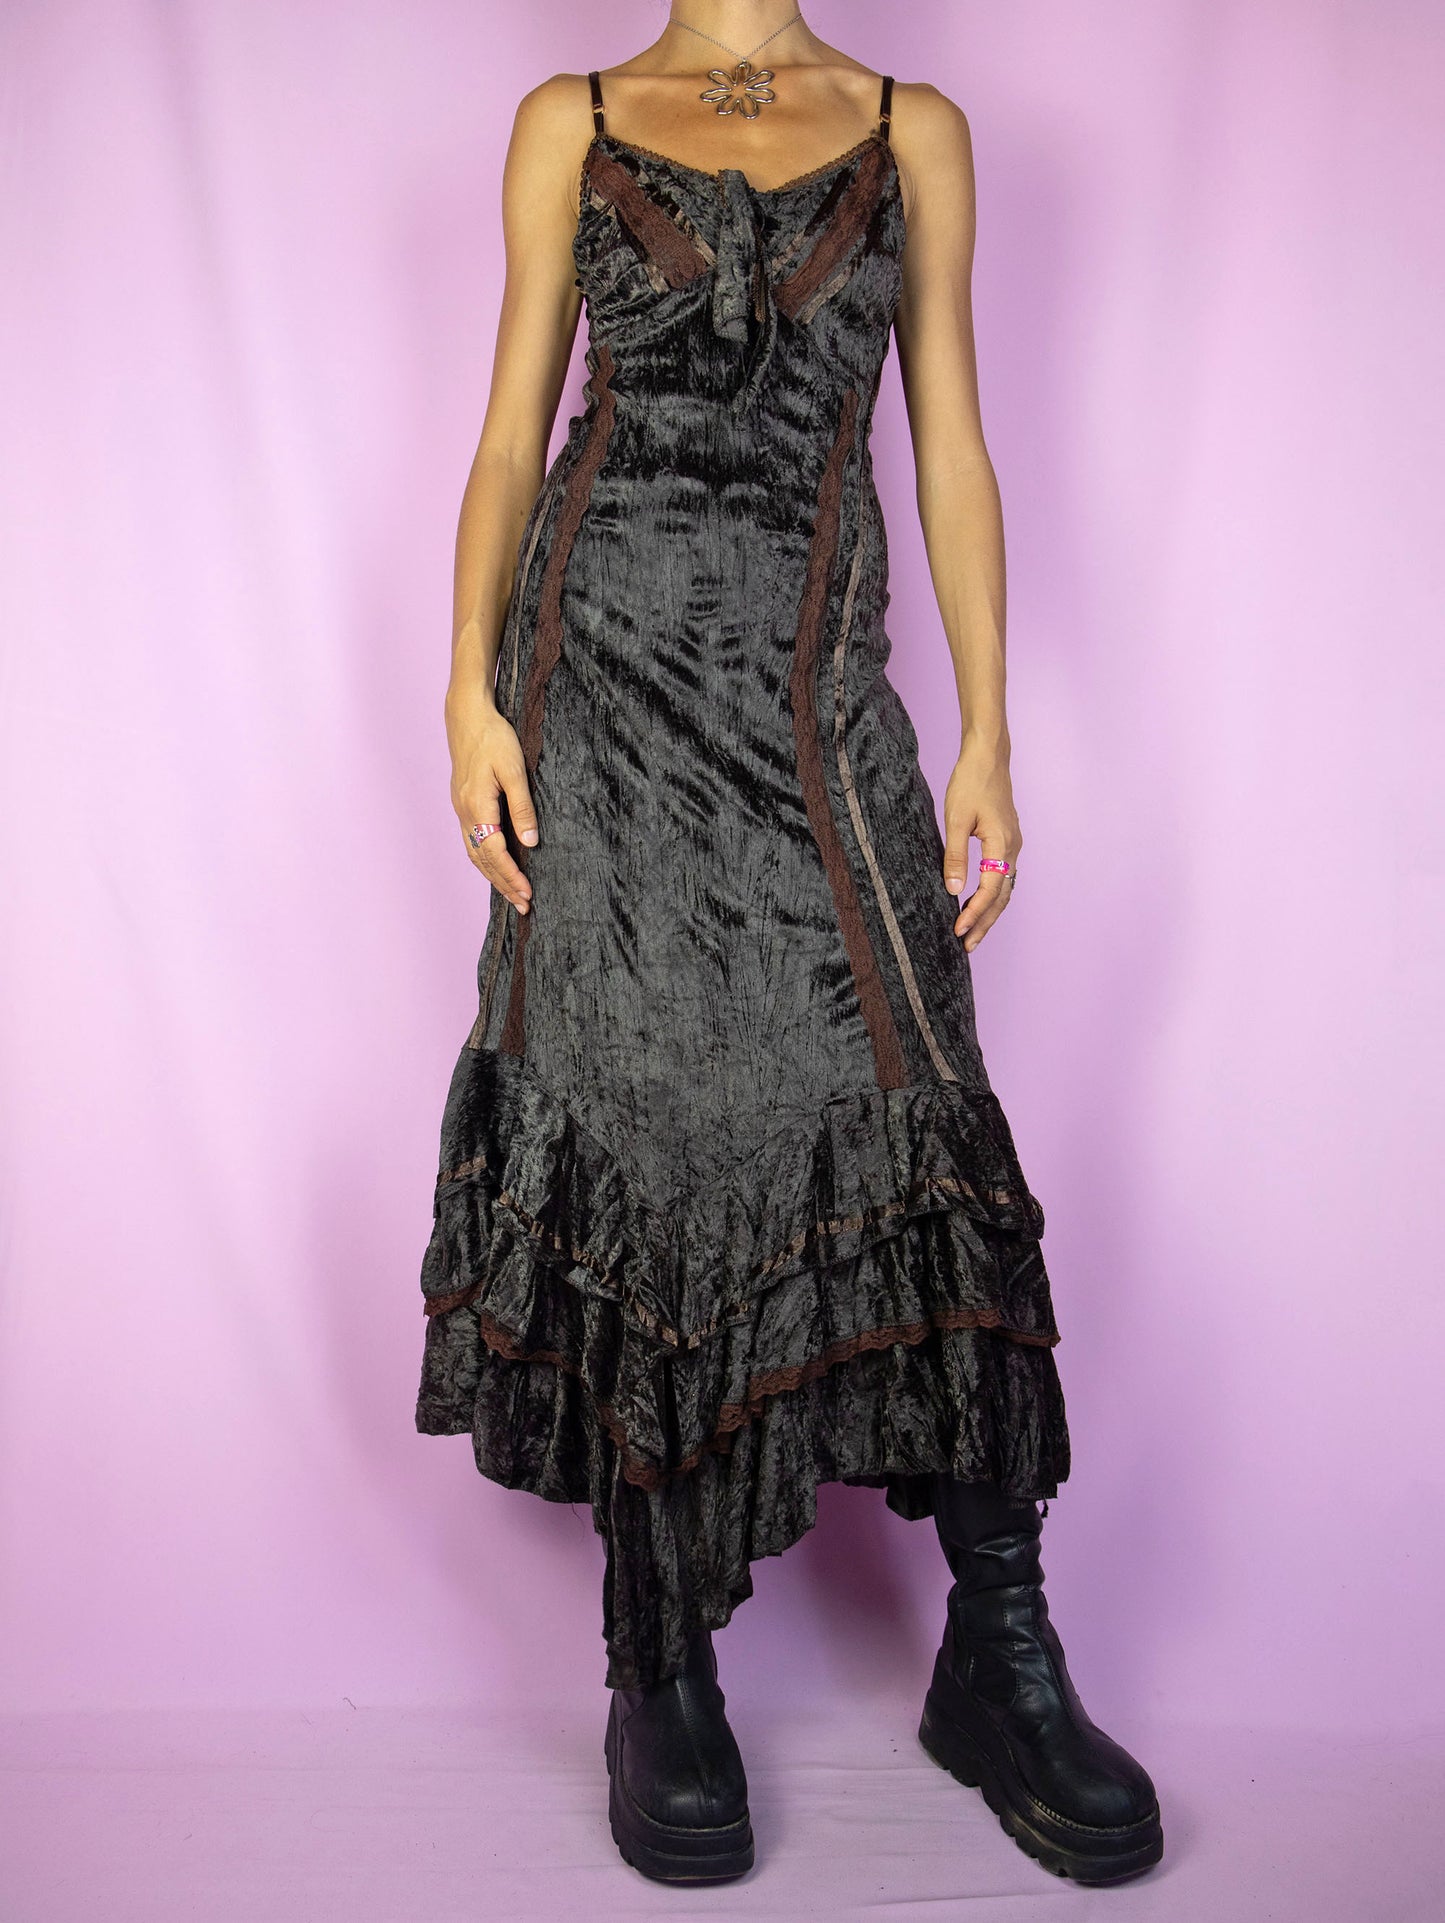 The Vintage 90s Brown Velvet Maxi Dress is a dark brown dress with adjustable straps, a tied v-neck, asymmetrical ruffled hem, lace details, and a lace-up tied back. Fairy grunge whimsygoth style 1990s evening party midi dress.